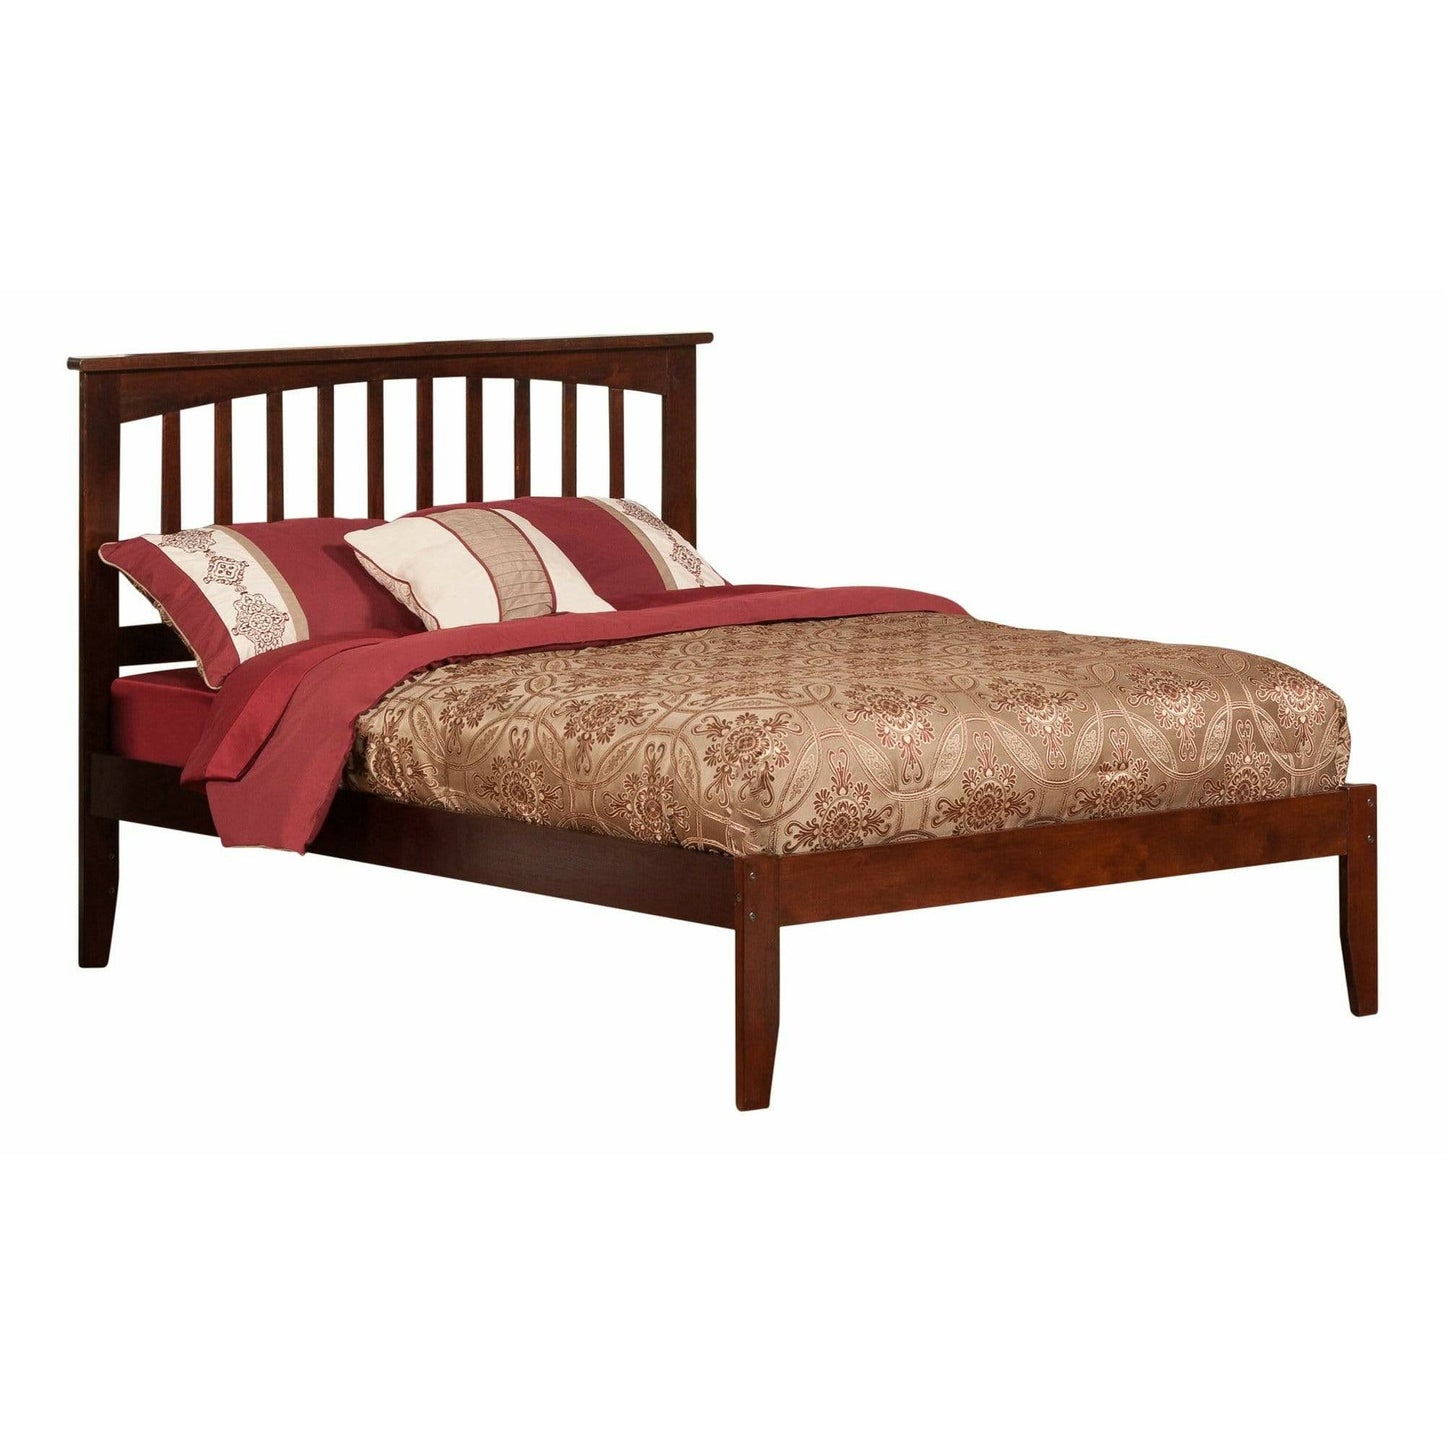 Atlantic Furniture Bed Mission Full Platform Bed with Open Foot Board in Espresso